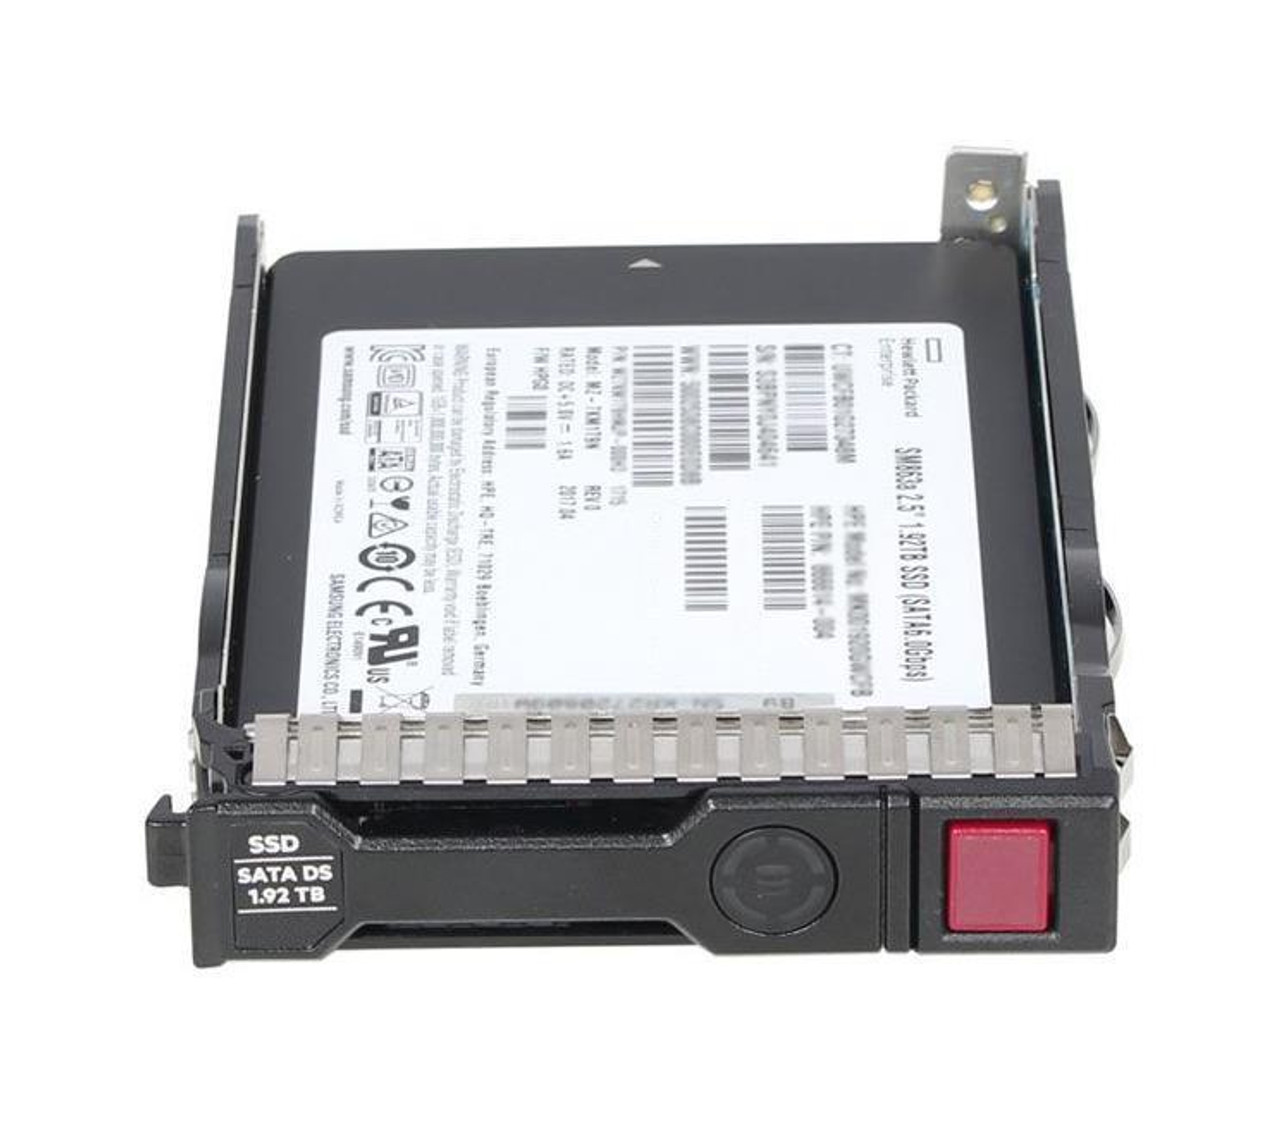 868826R-B21#0D1 HPE 1.92TB SATA 6Gbps Read Intensive 2.5-inch Internal Solid State Drive (SSD) with Smart Carrier